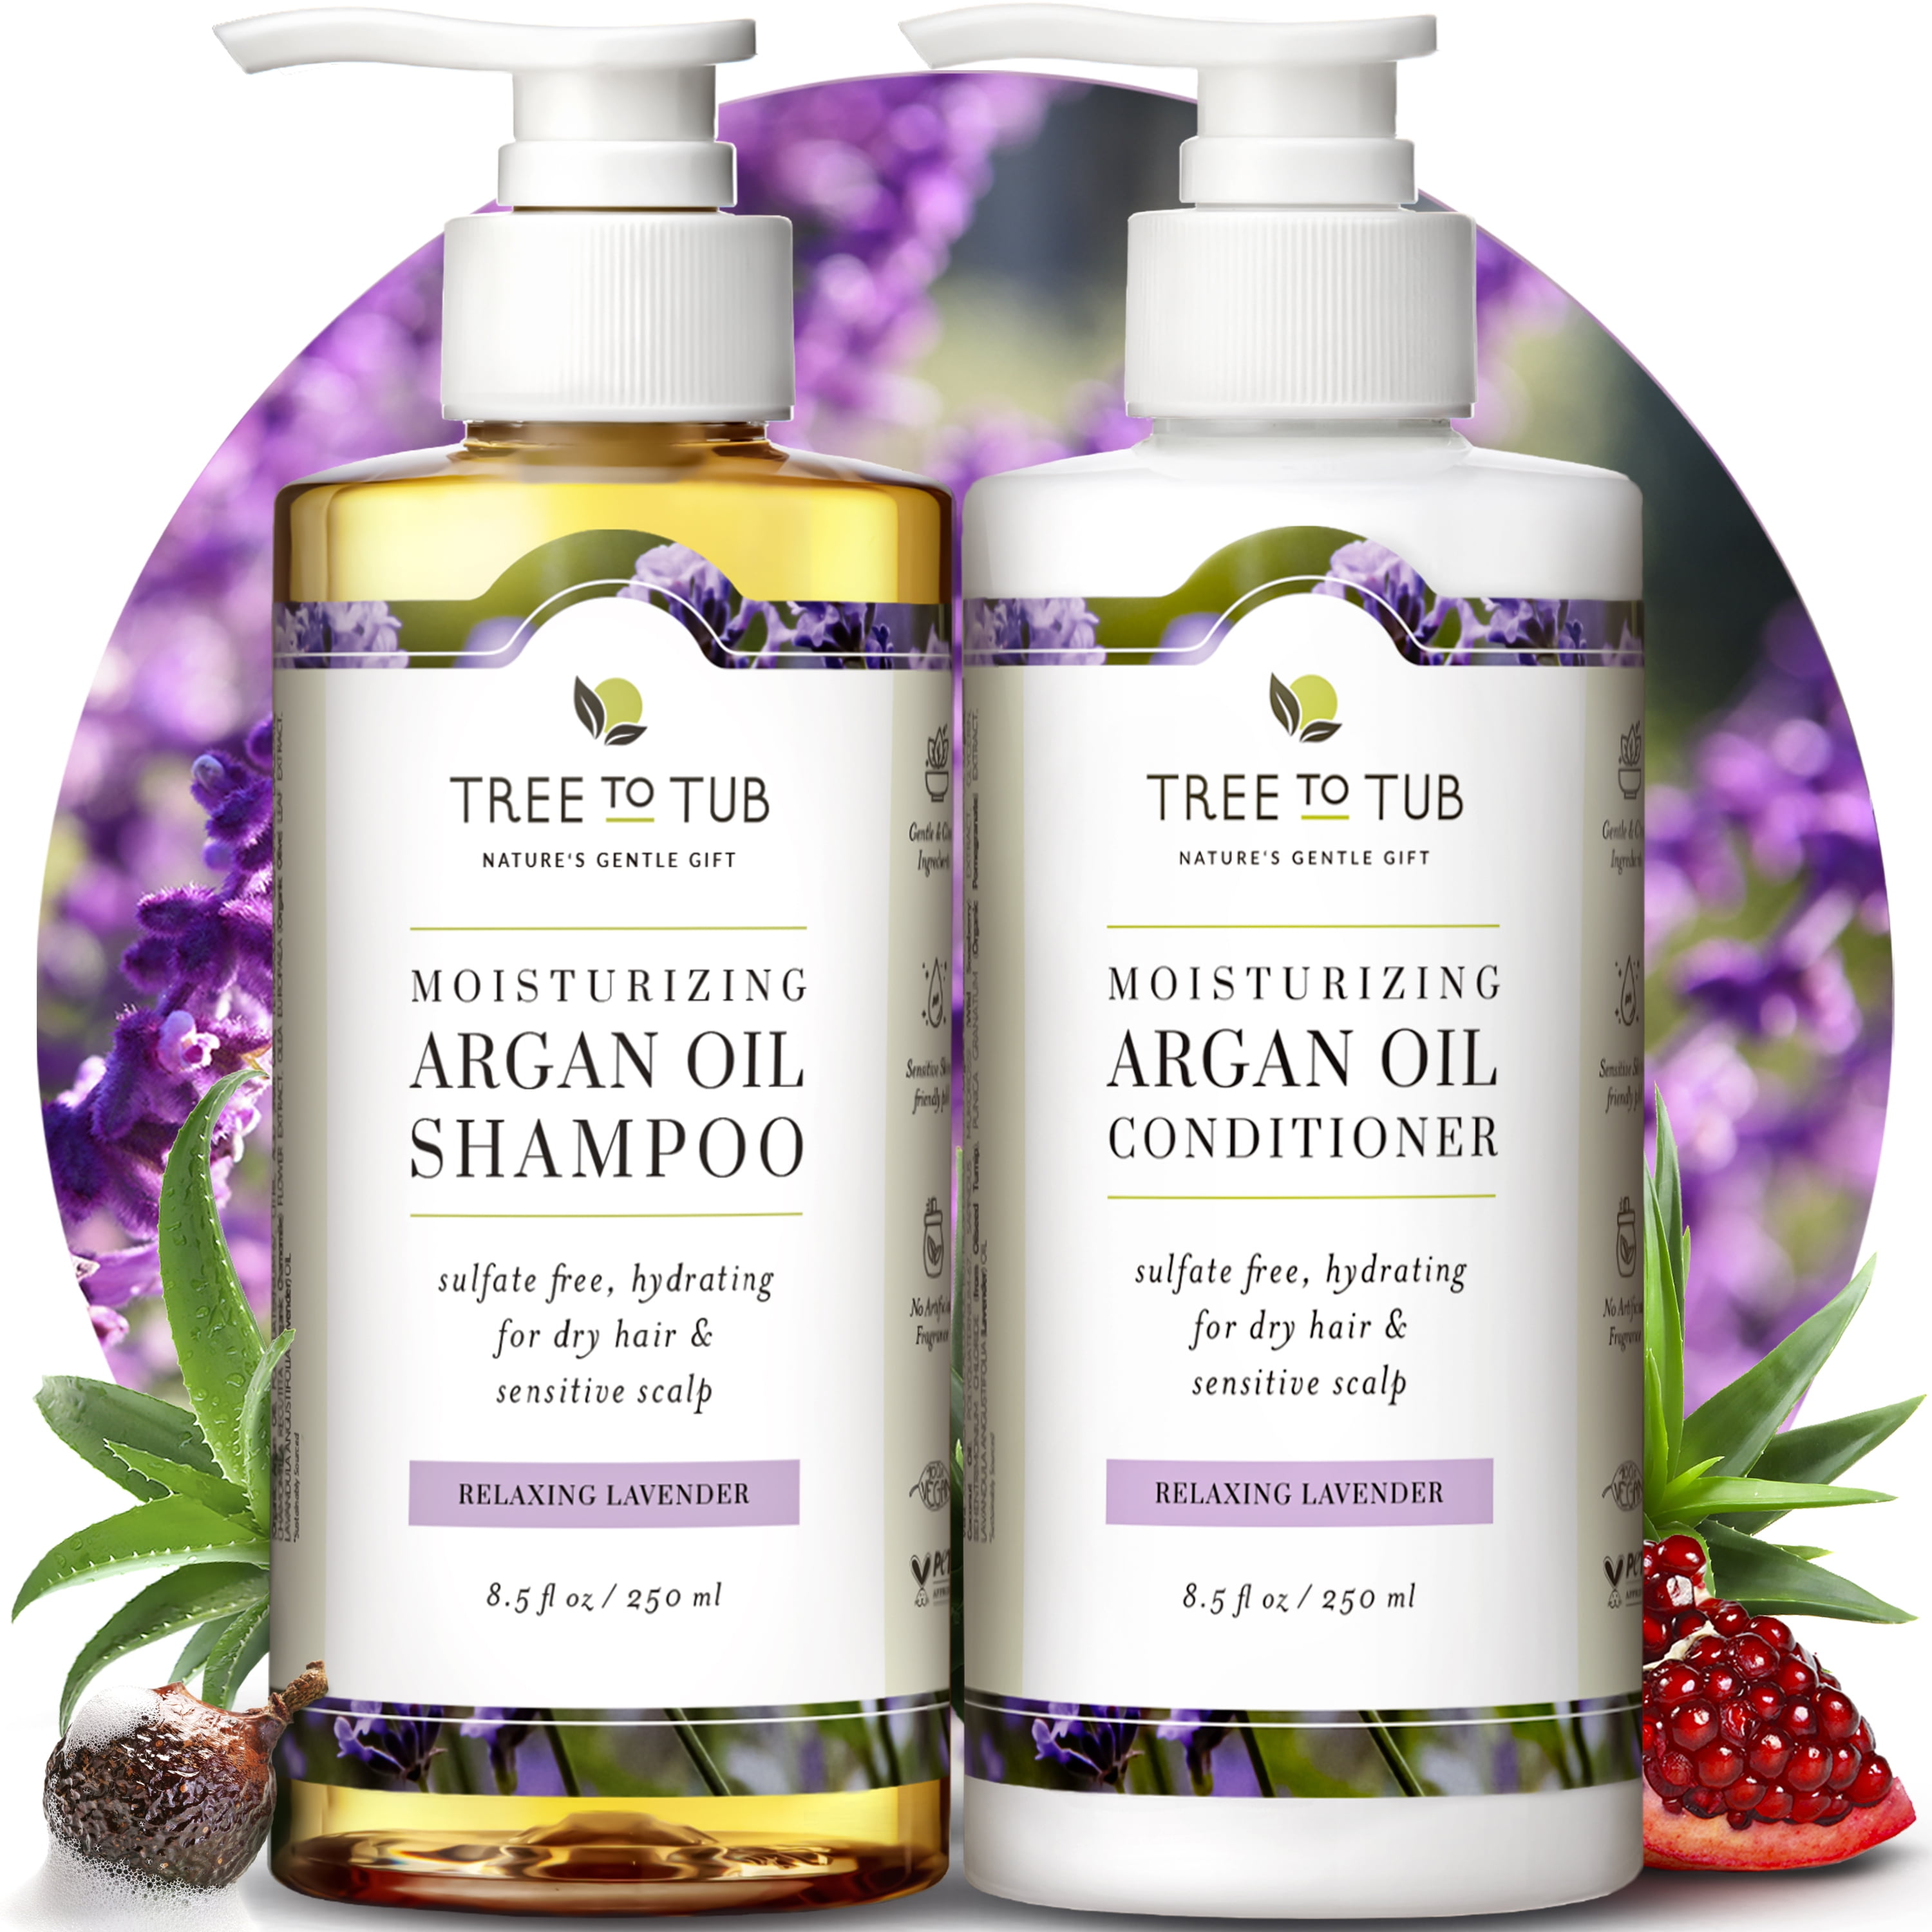 Viking Revolution Tea Tree Shampoo and Conditioner Set - Hydrates  Moisturizes Soothes Dry and Itchy Scalps - With Natural Tea Tree Oil - 17 oz